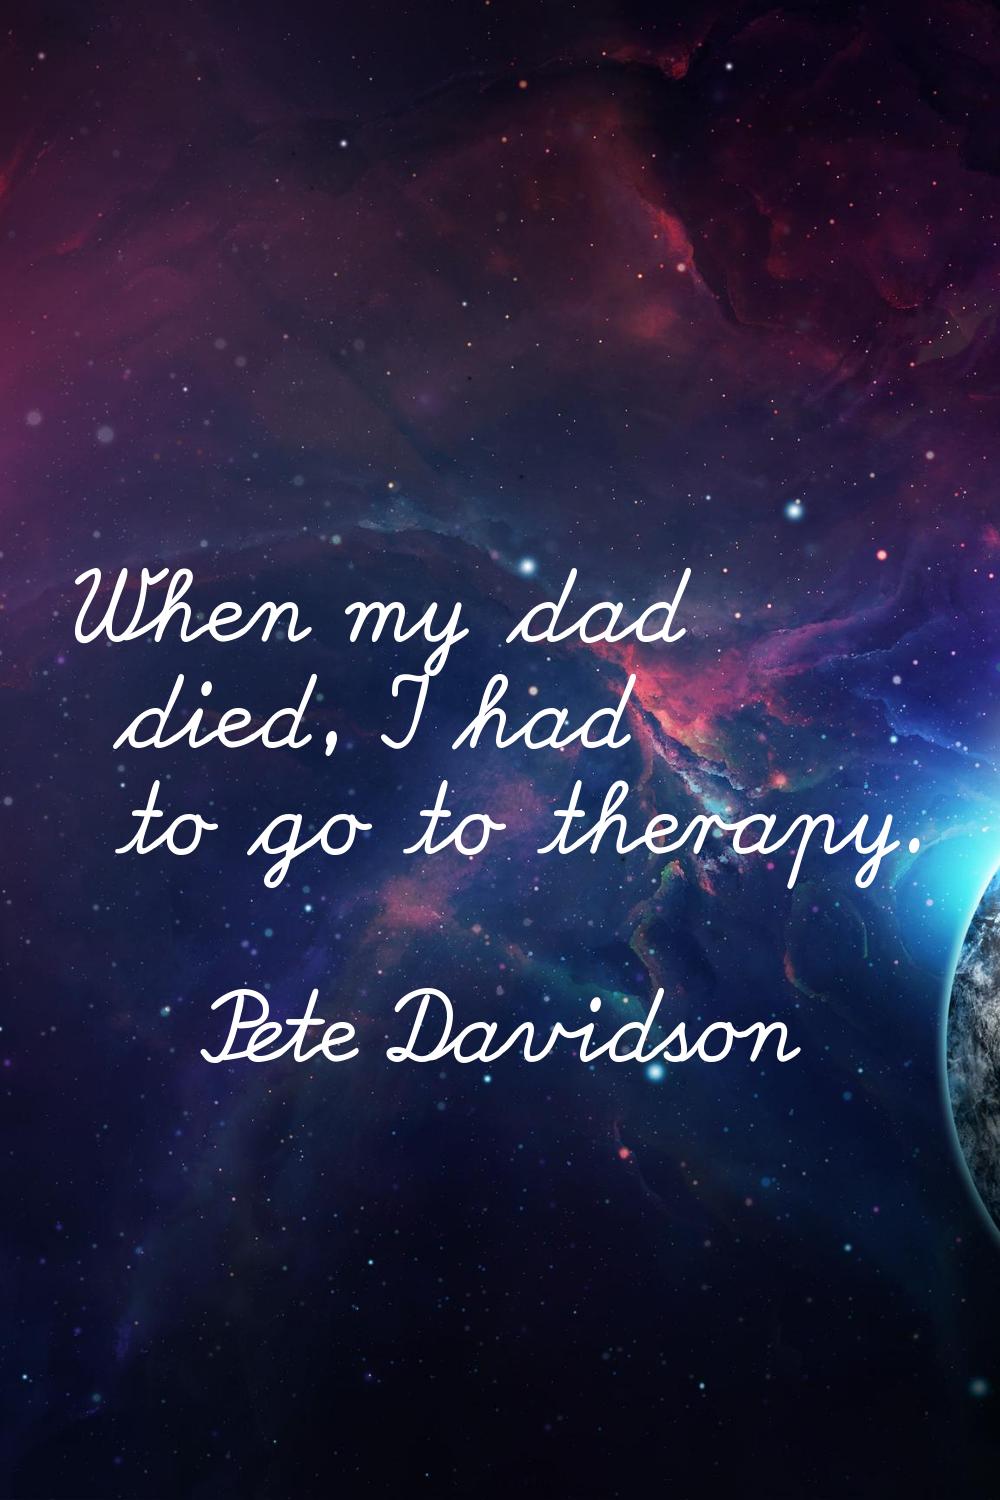 When my dad died, I had to go to therapy.